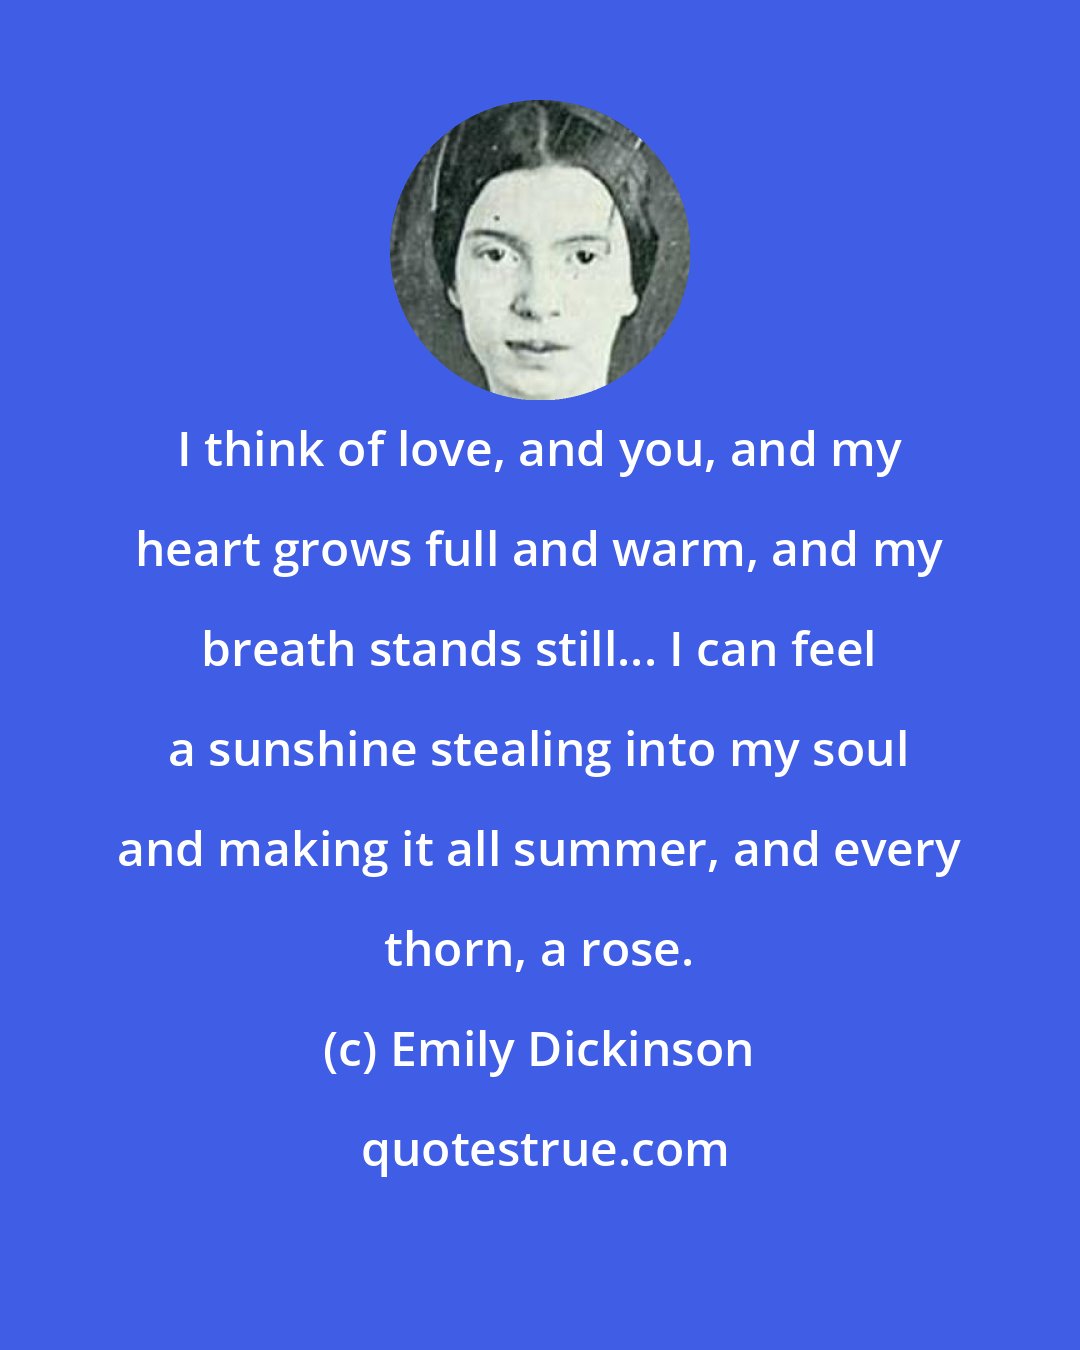 Emily Dickinson: I think of love, and you, and my heart grows full and warm, and my breath stands still... I can feel a sunshine stealing into my soul and making it all summer, and every thorn, a rose.